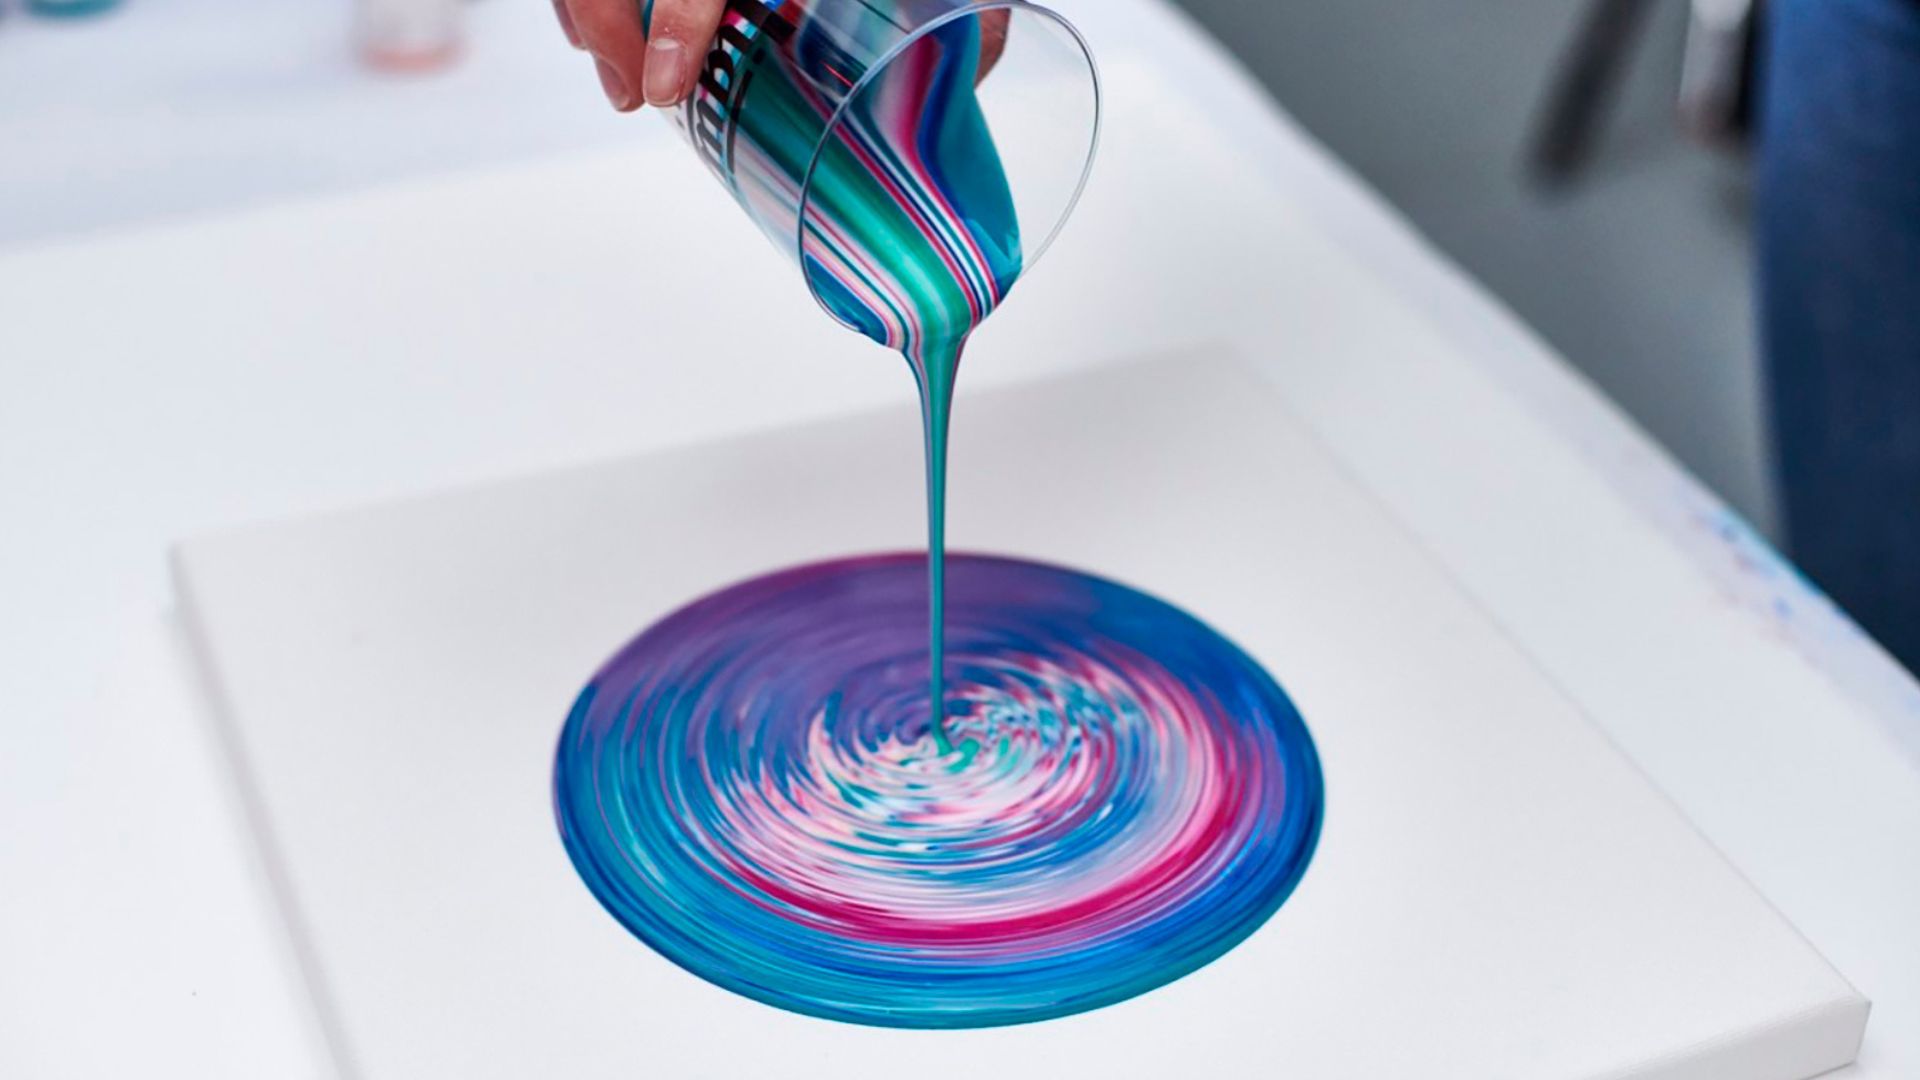 Acrylic pouring paint